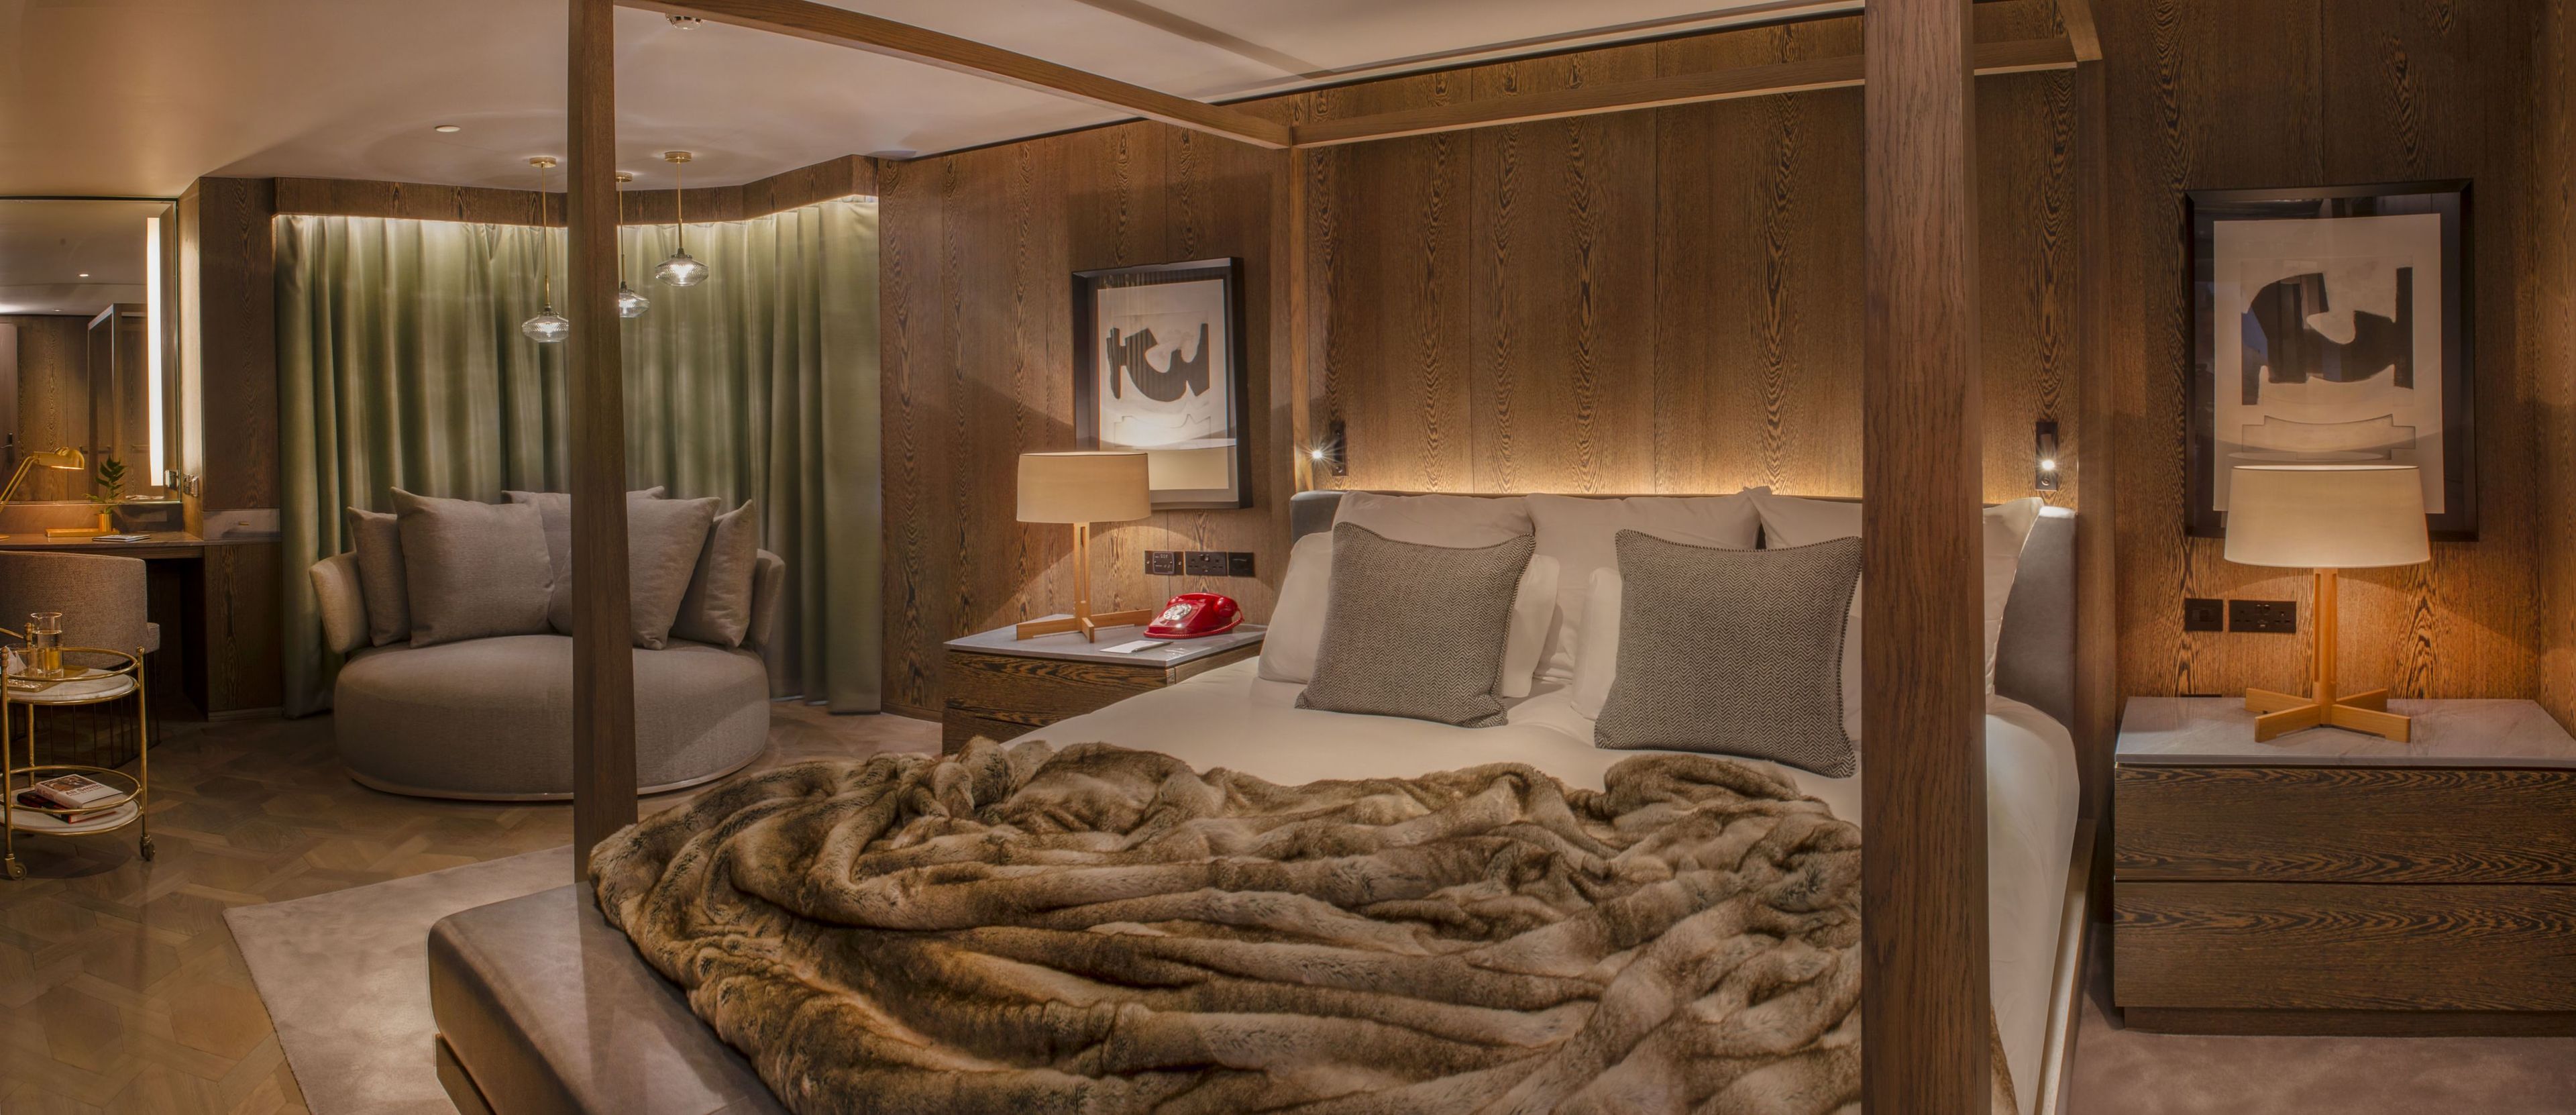 The master bedroom in the Blythswood Square penthouse